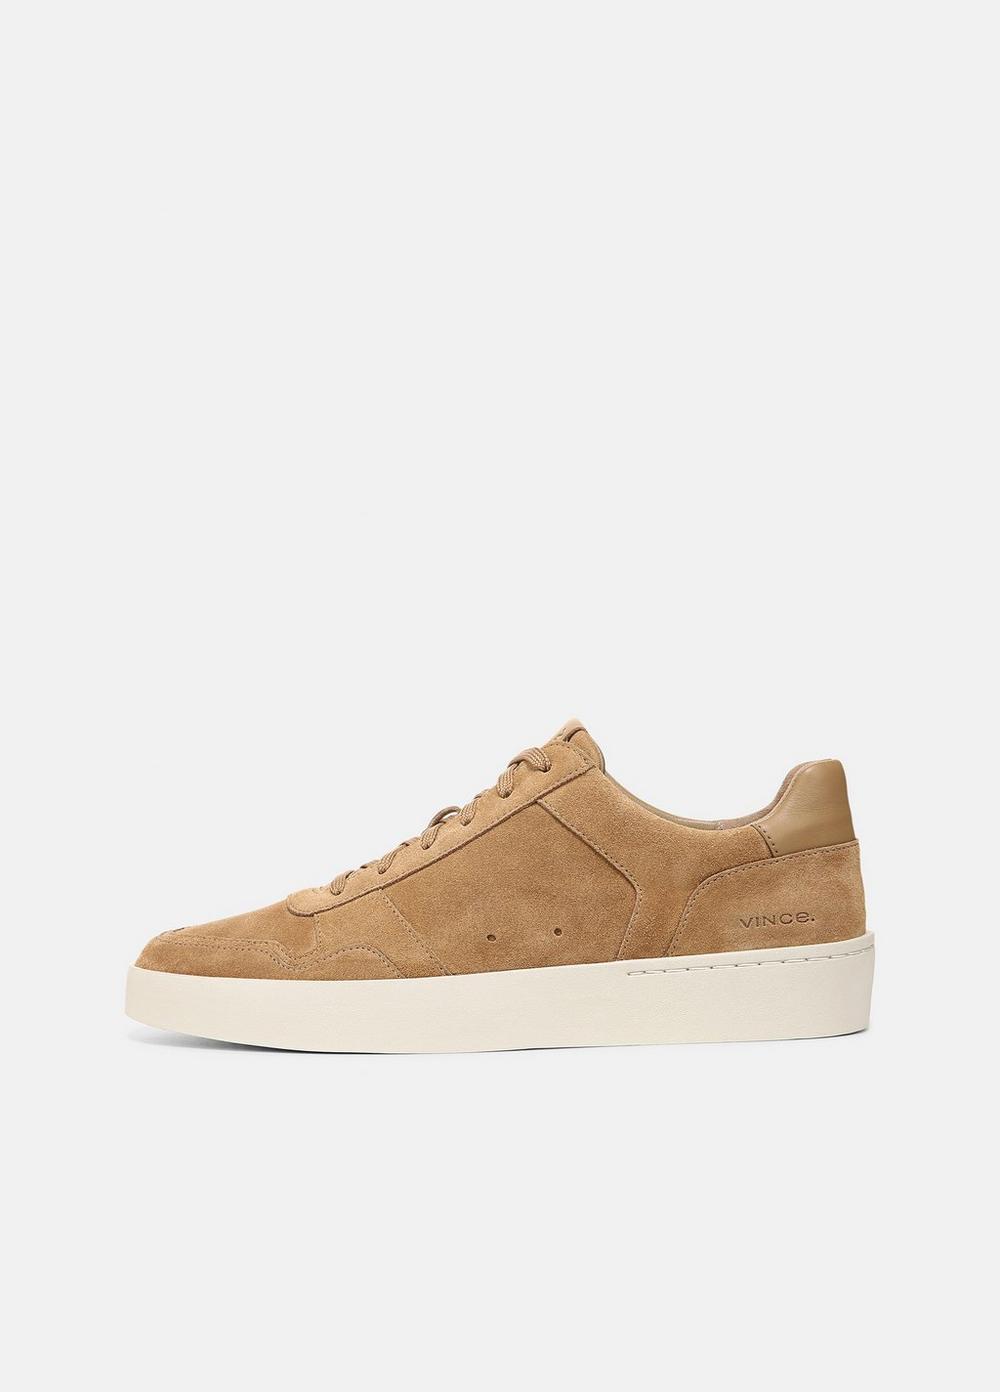 Peyton Leather Lace-Up Sneaker, New Camel, Size 9 Vince